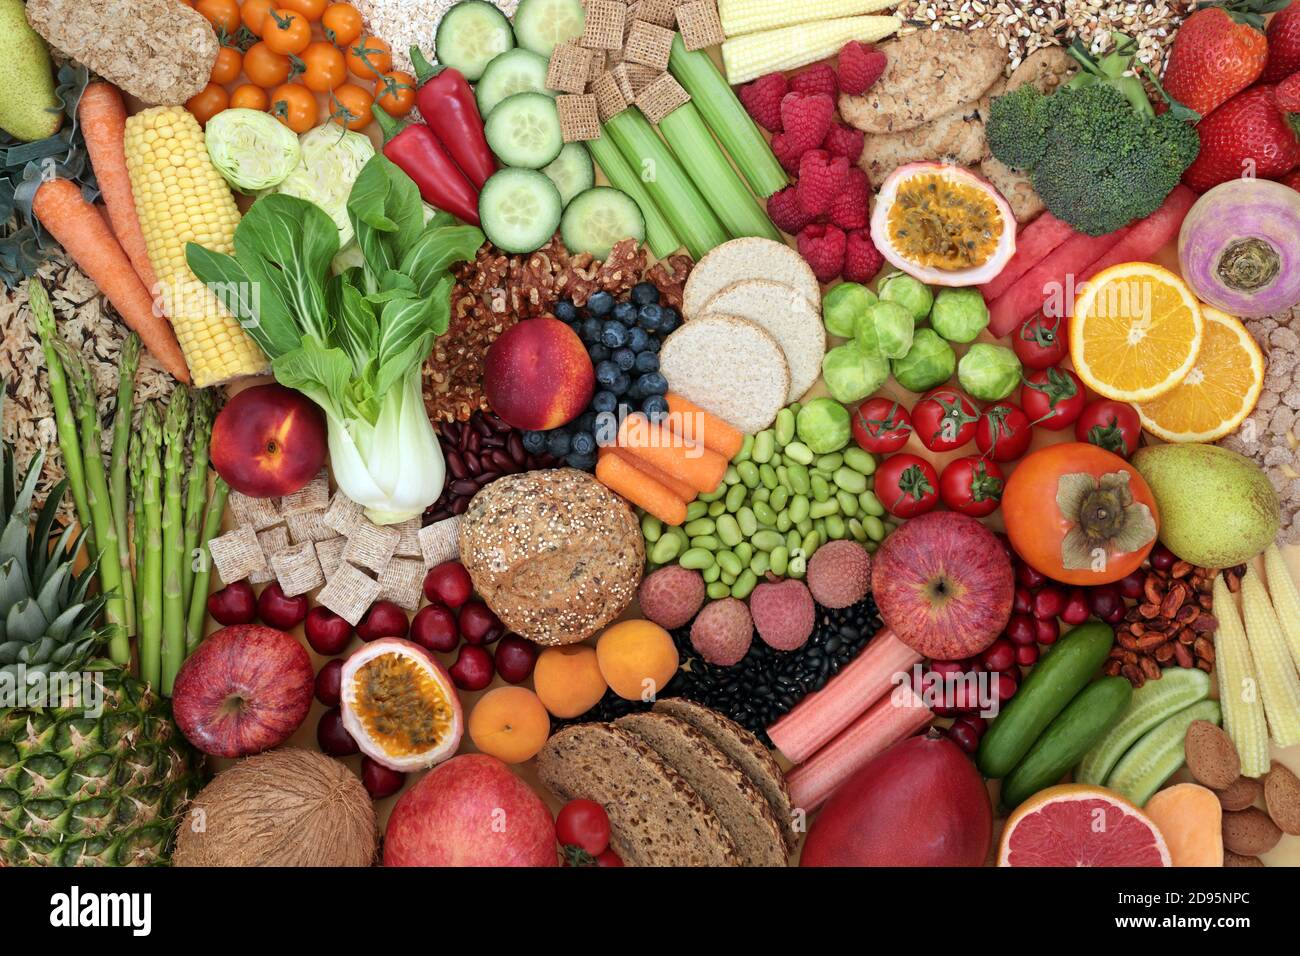 Low cholesterol high fibre food with fruit, vegetables, grain products, cereals, legumes & nuts. High in anthocyanins, antioxidants, omega 3, protein. Stock Photo